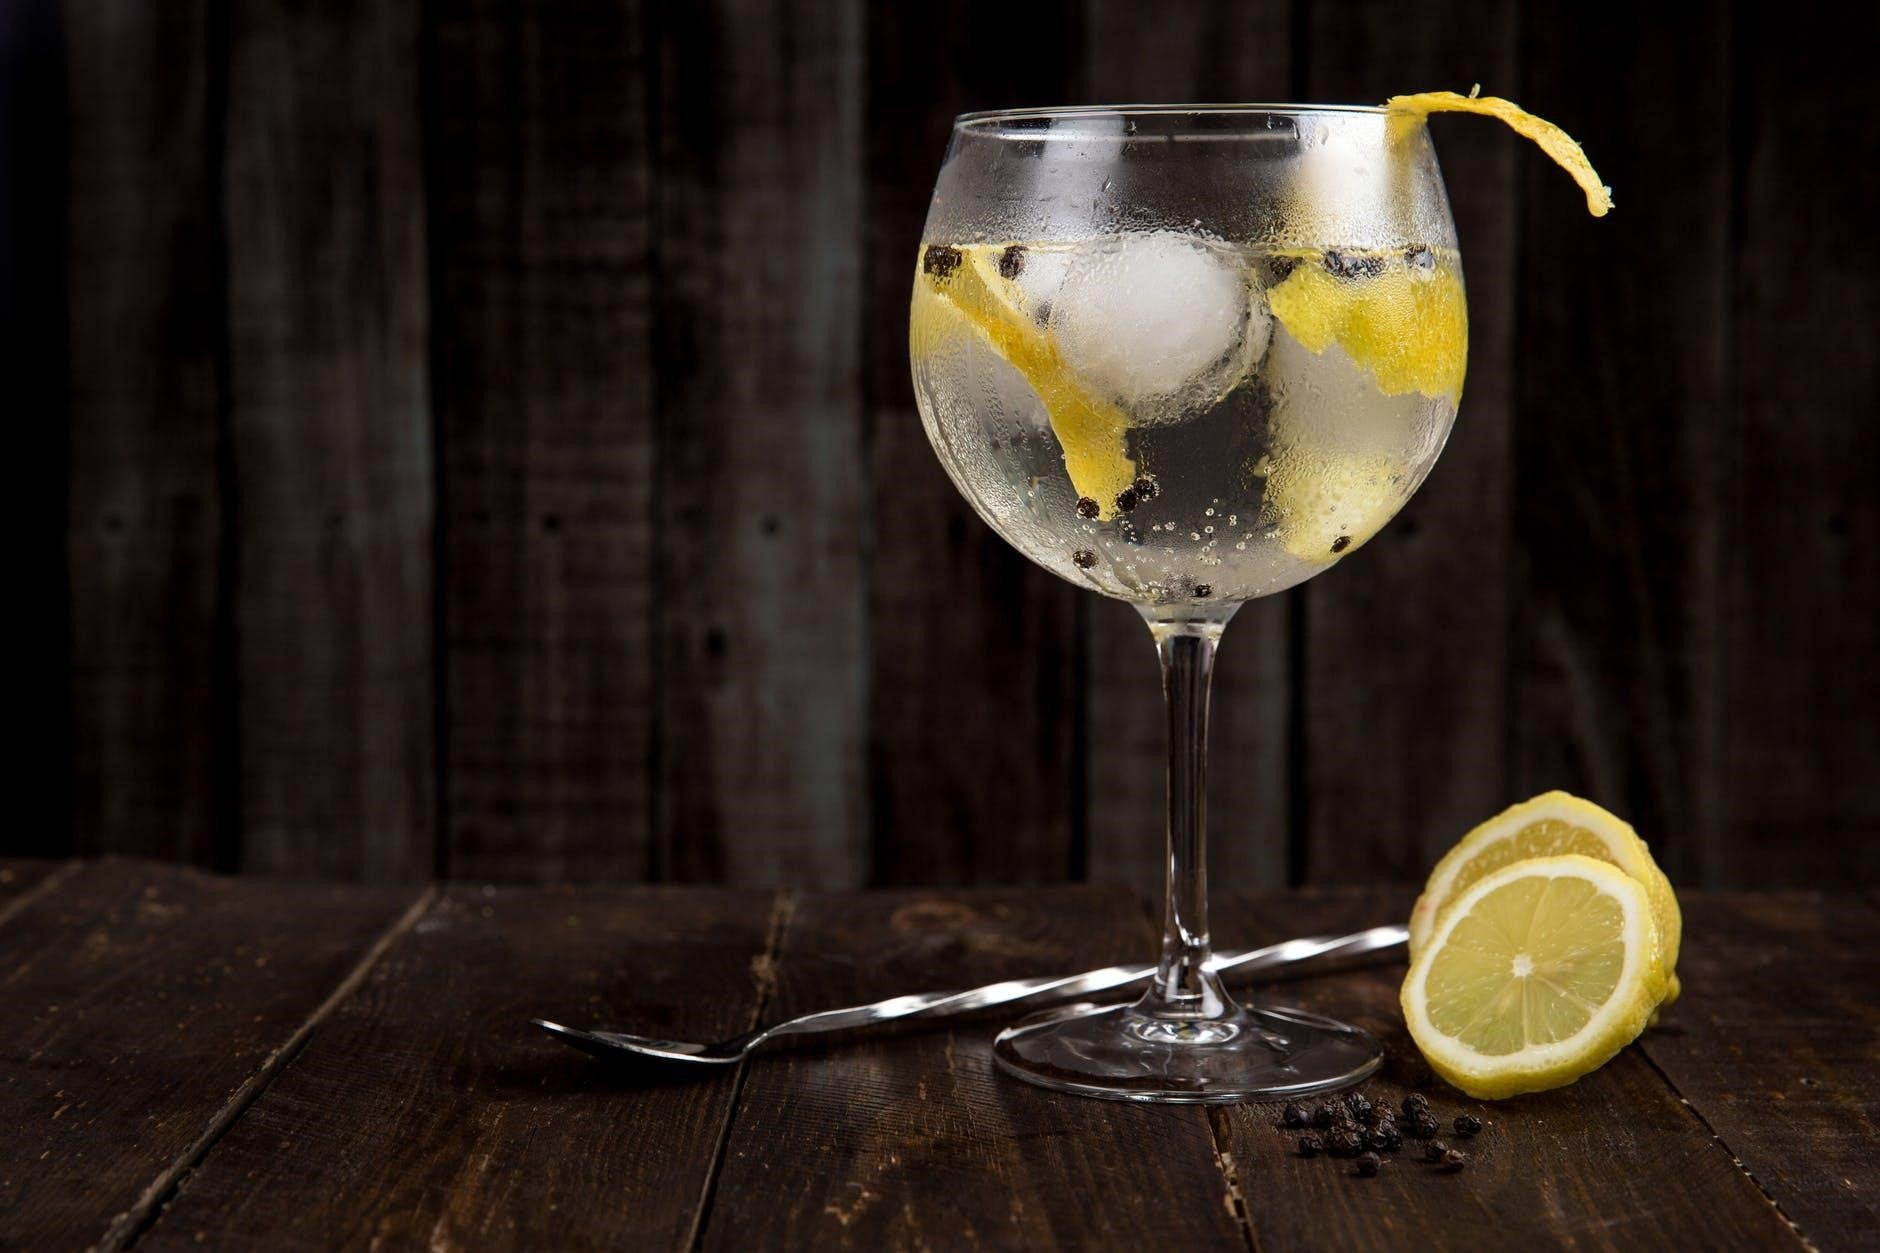 The essential elements to get the perfect gin and tonic